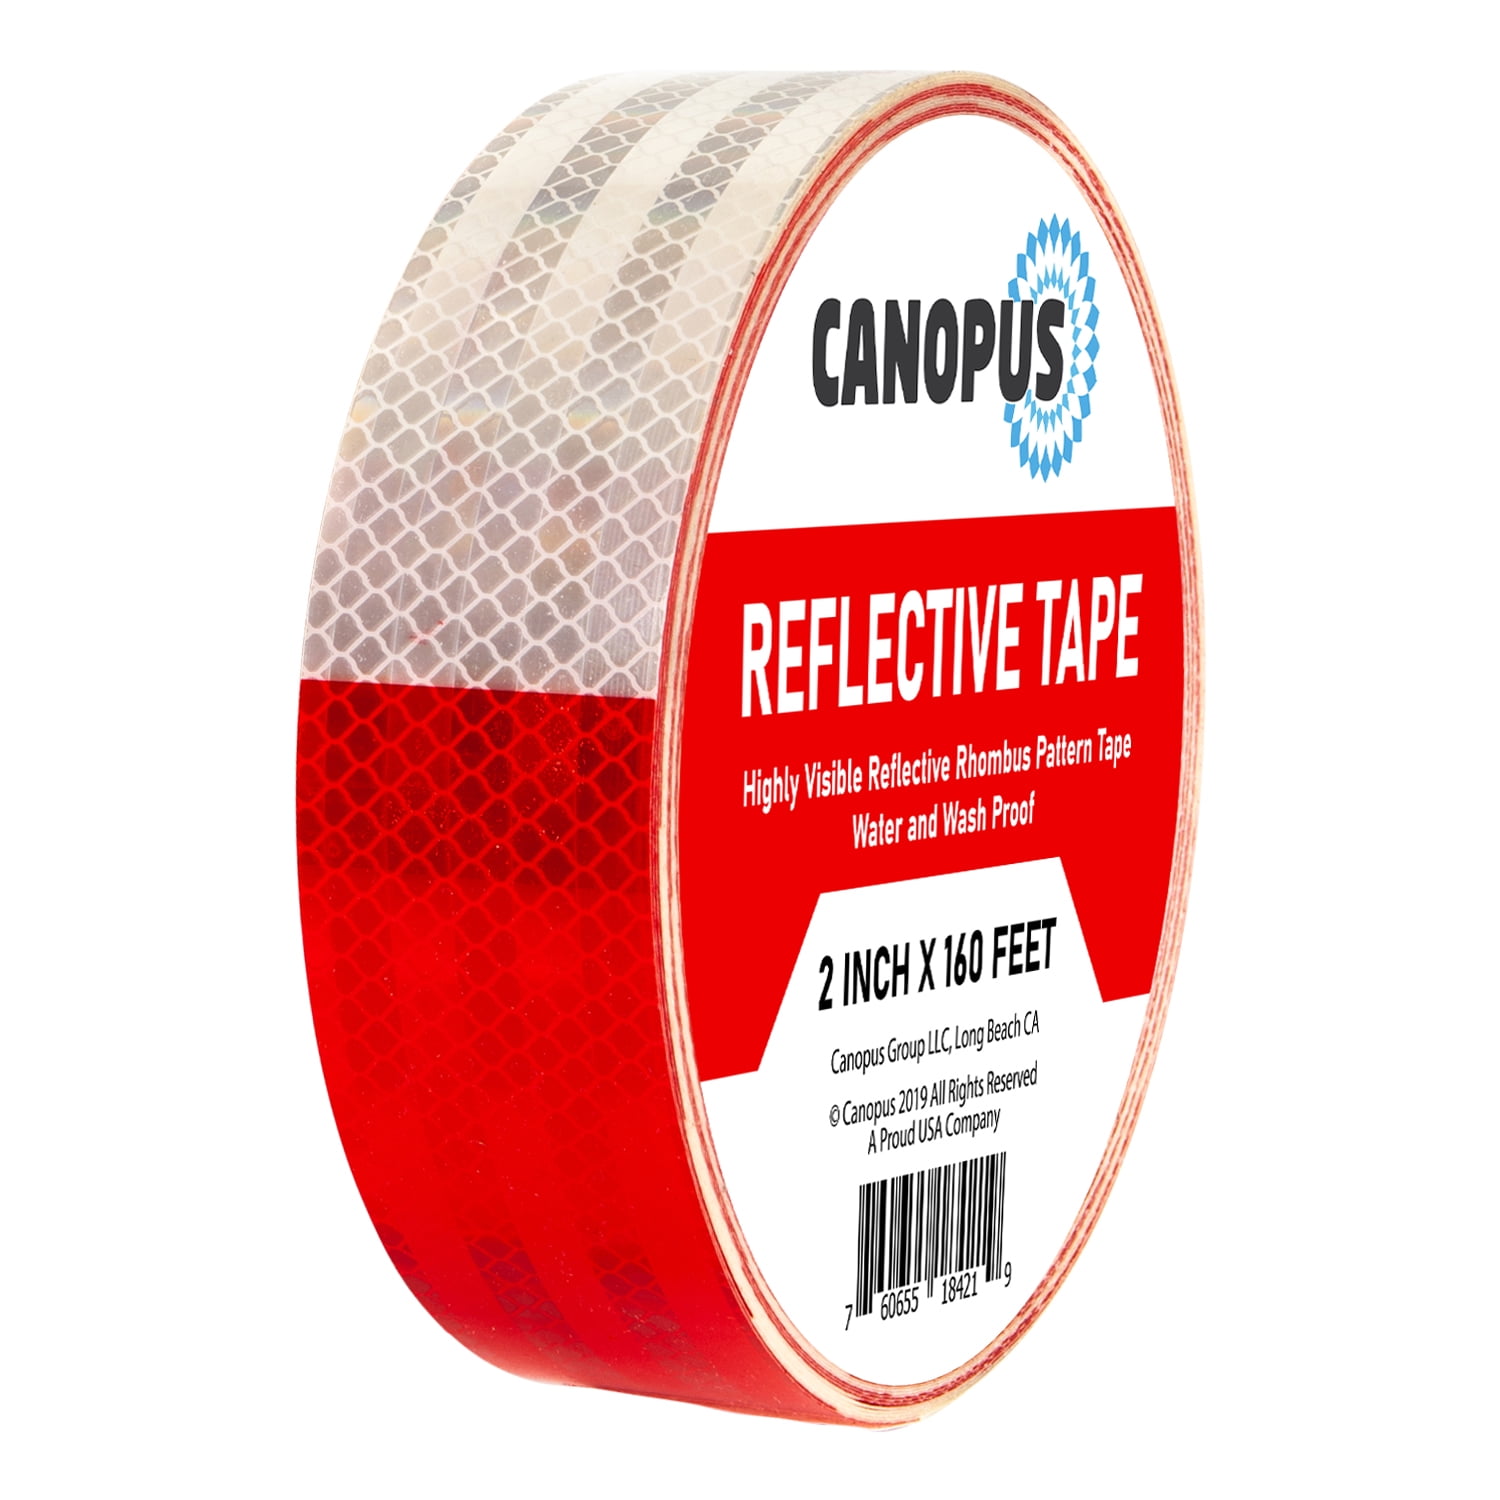 DOT-C2 Safety Reflective Tape Auto Car Red And White Adhesive Strip 2" x30' 